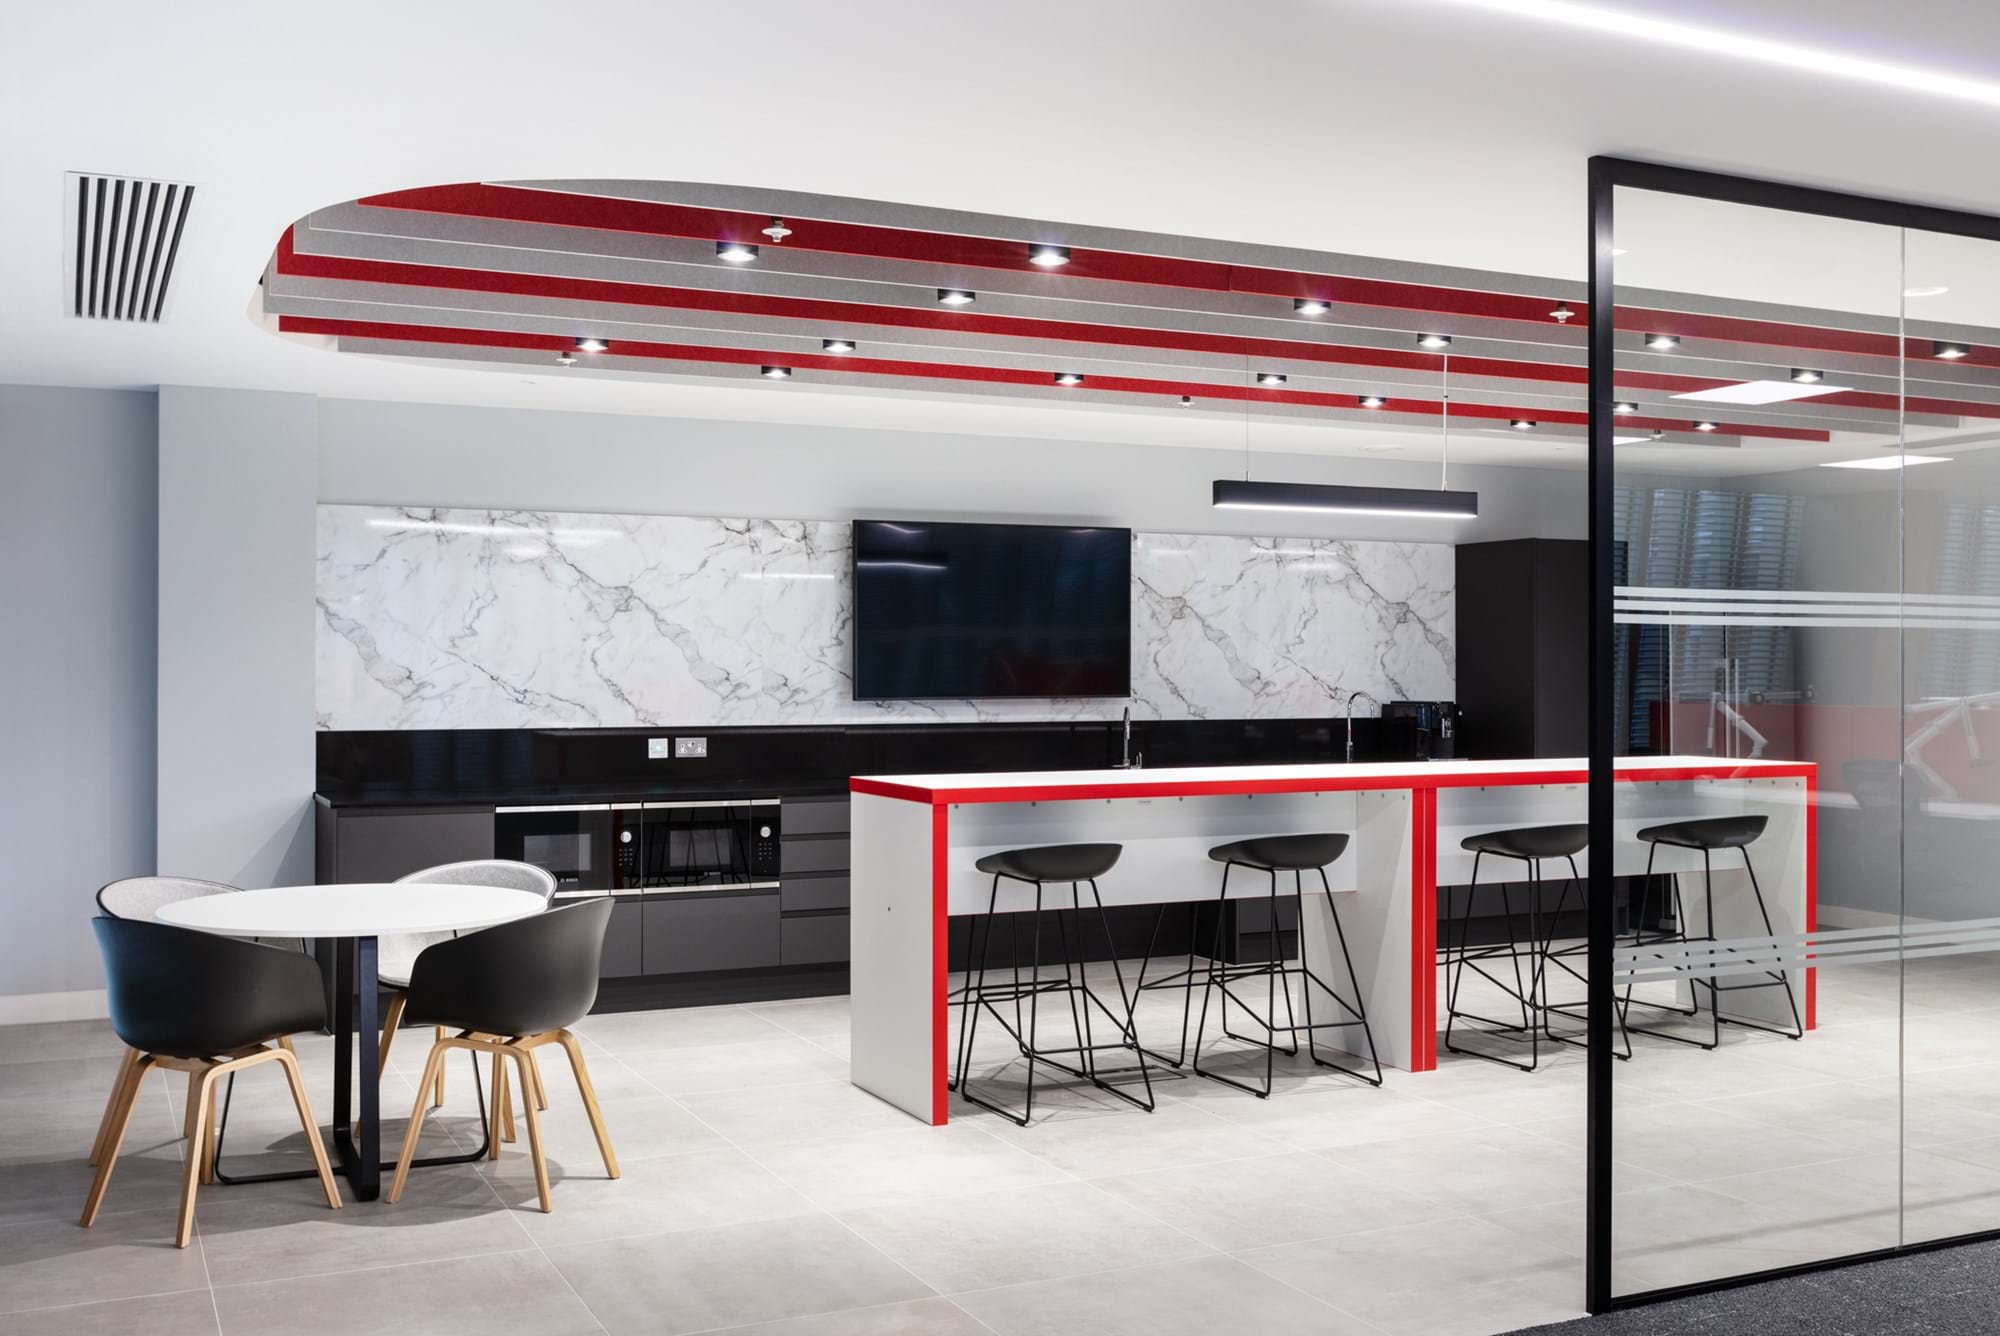 Modus Workspace office design, fit out and refurbishment - International Private Bank - Modus_Bank_Of_Canada-9.jpg